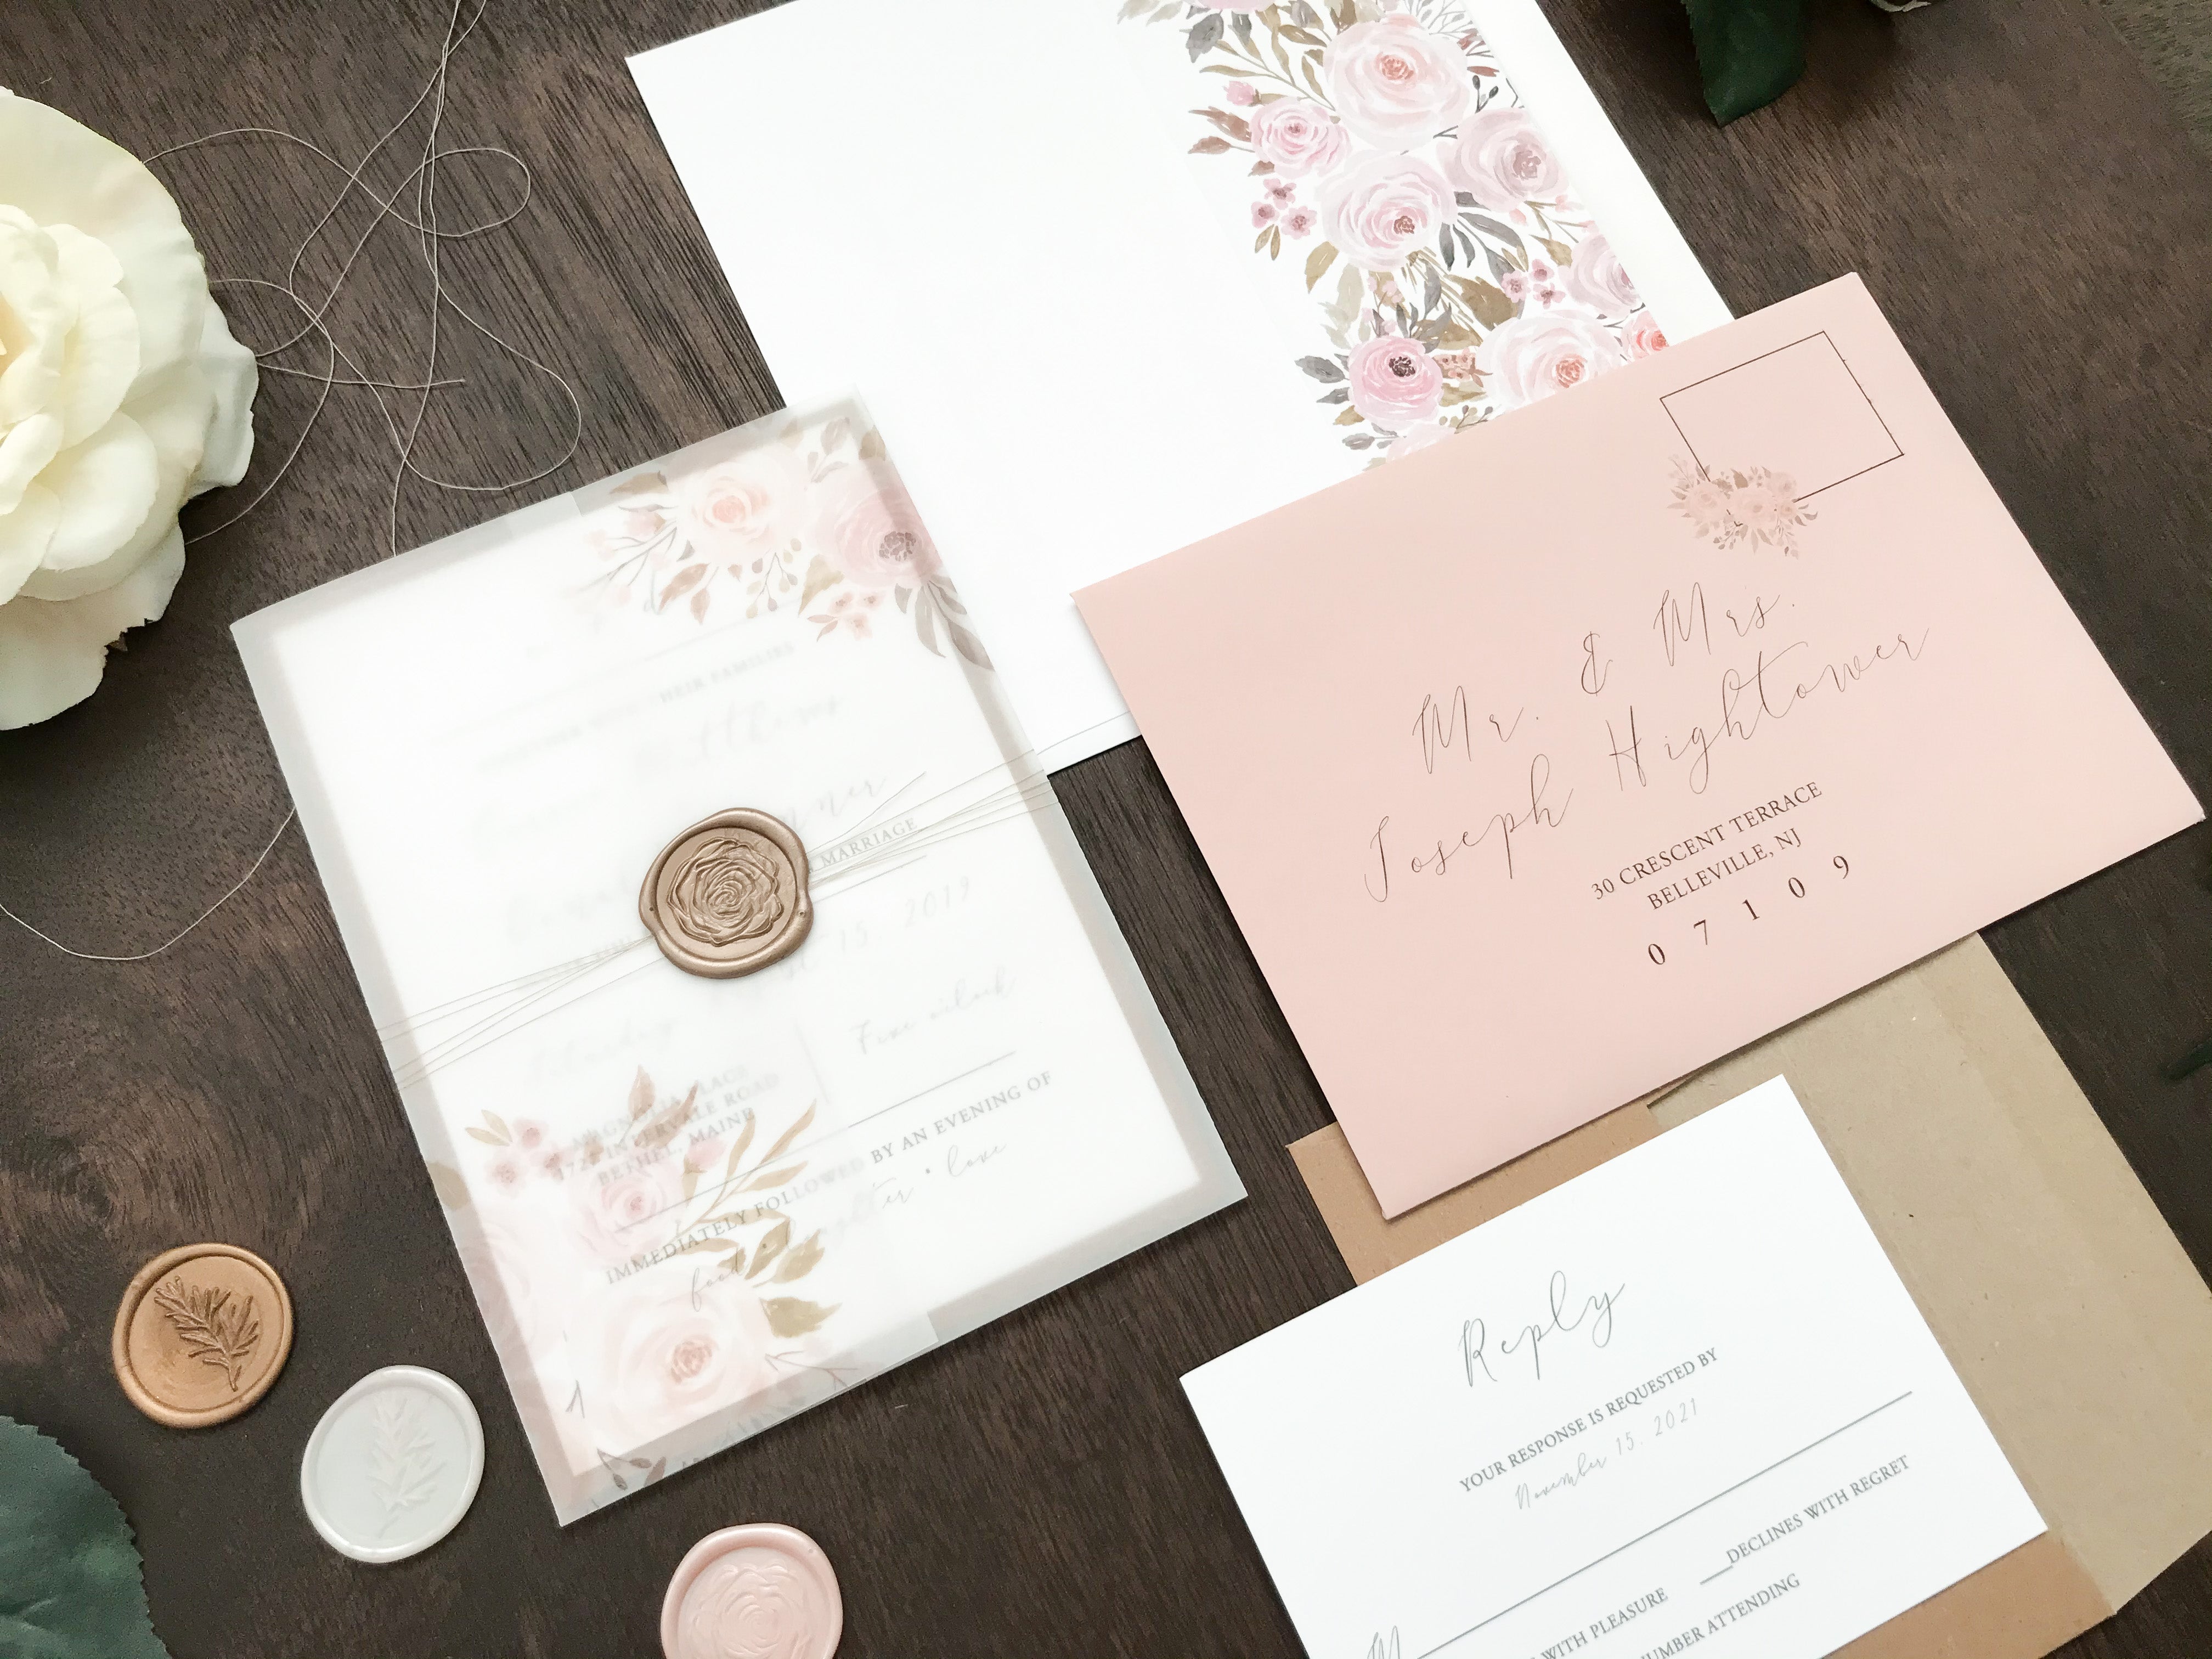 Muted Blush Pink and Neutral Floral Wedding Invitation with Vellum and Wax Seal